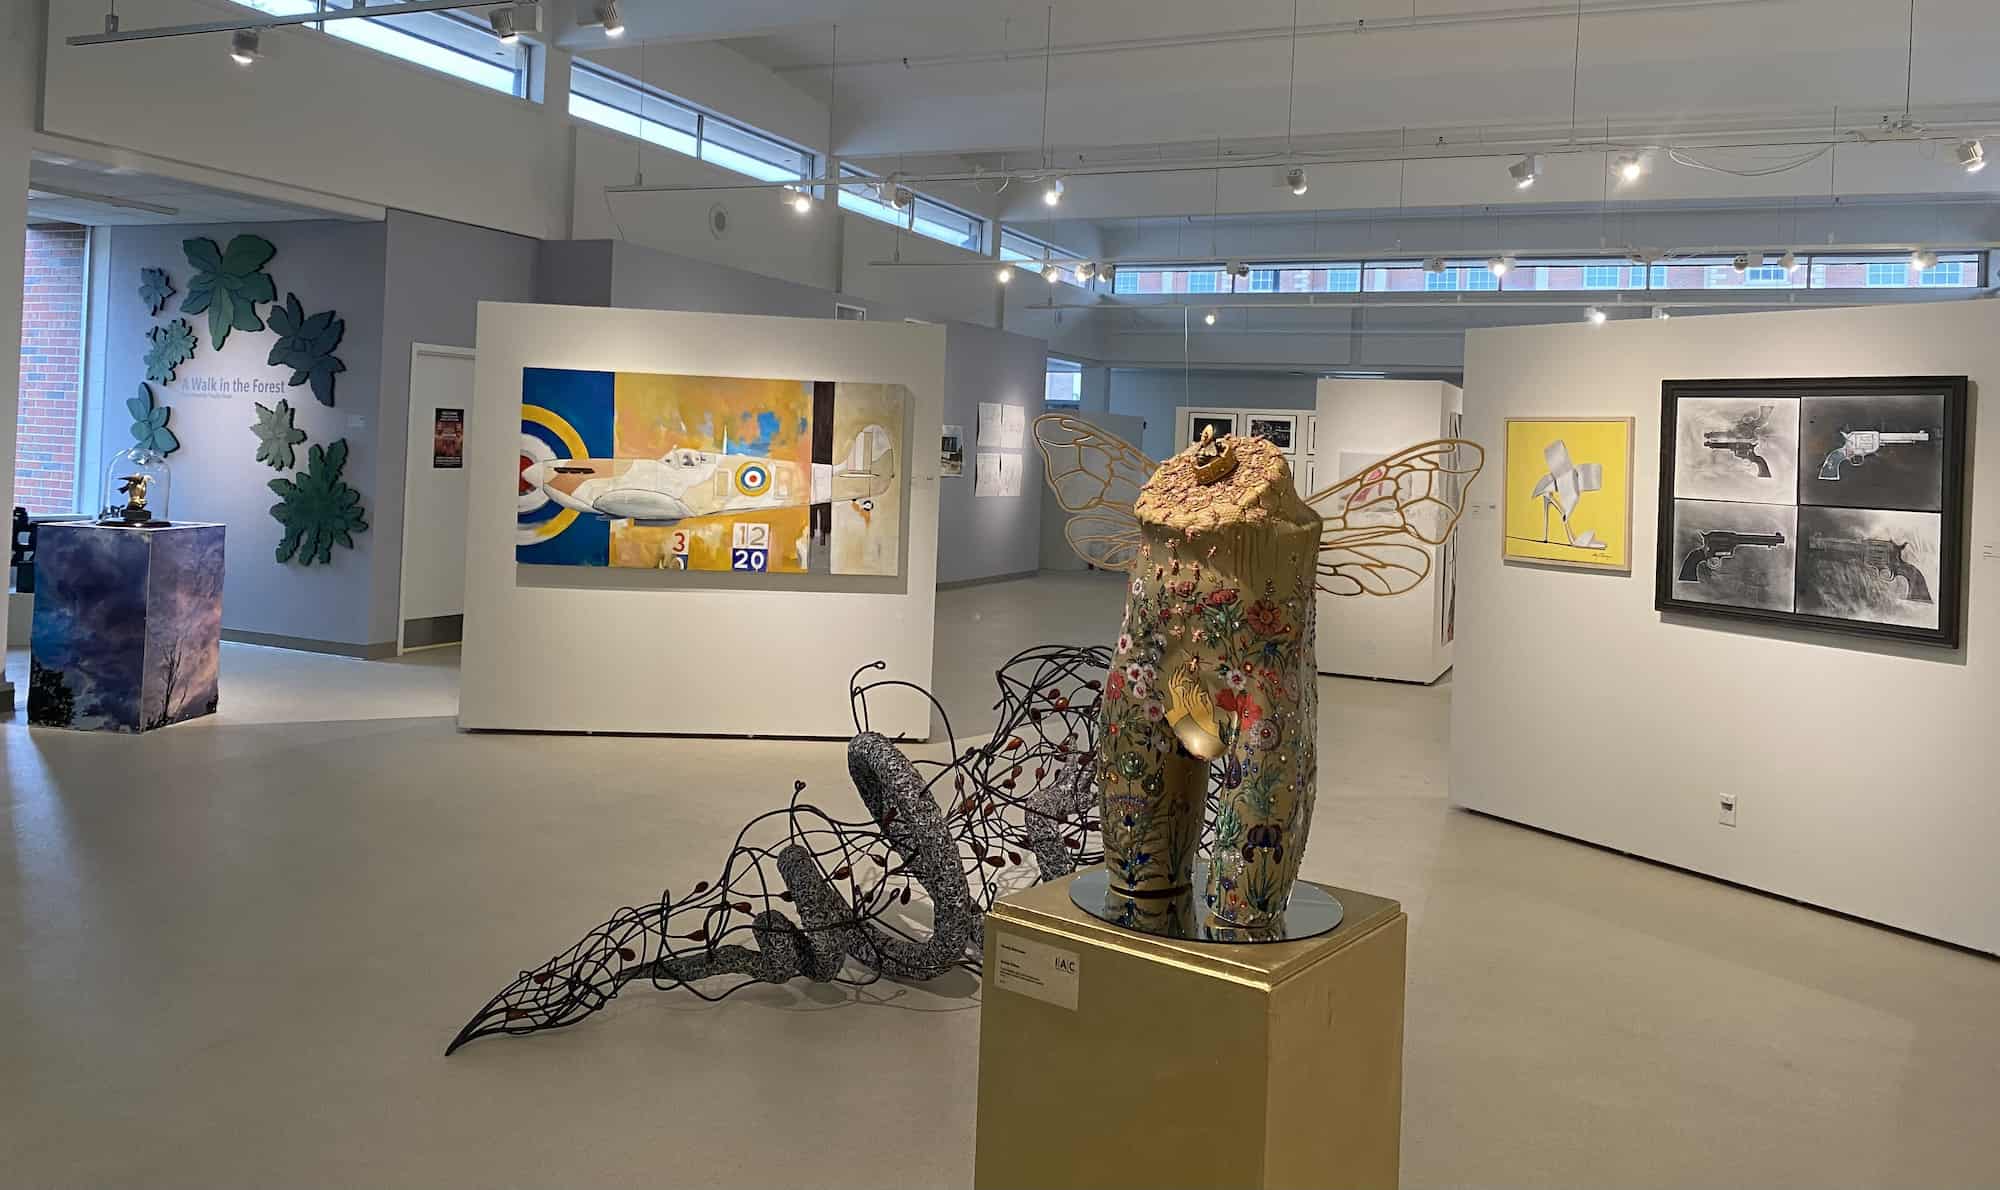 Image shows the entirity of the gallery featuring a painting of an airplane and a golden mannequin sculpture with bee wings.